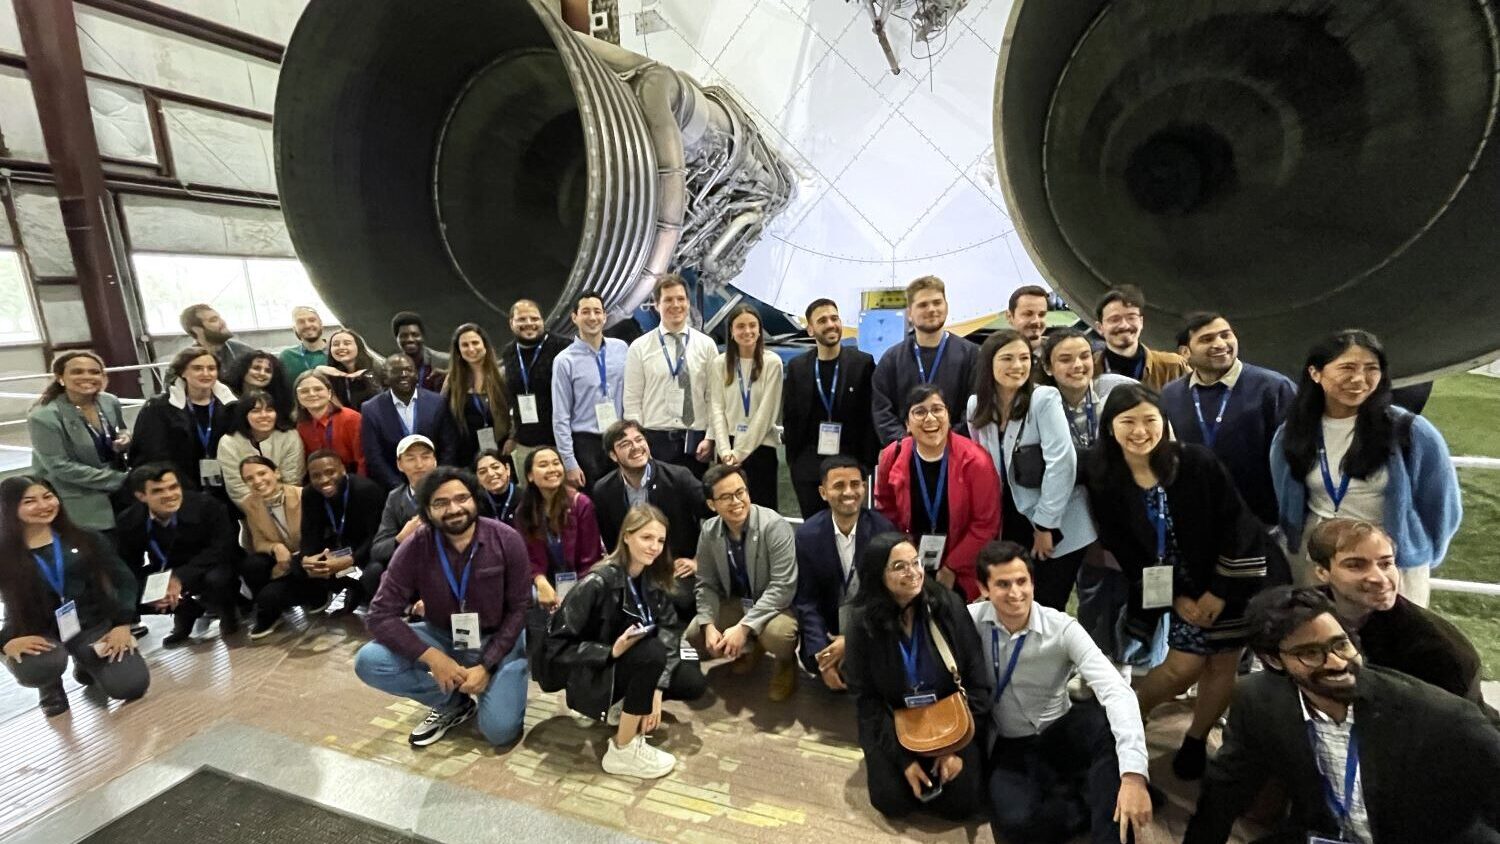 Fulbrighters posing in front of rocket engines at NASA